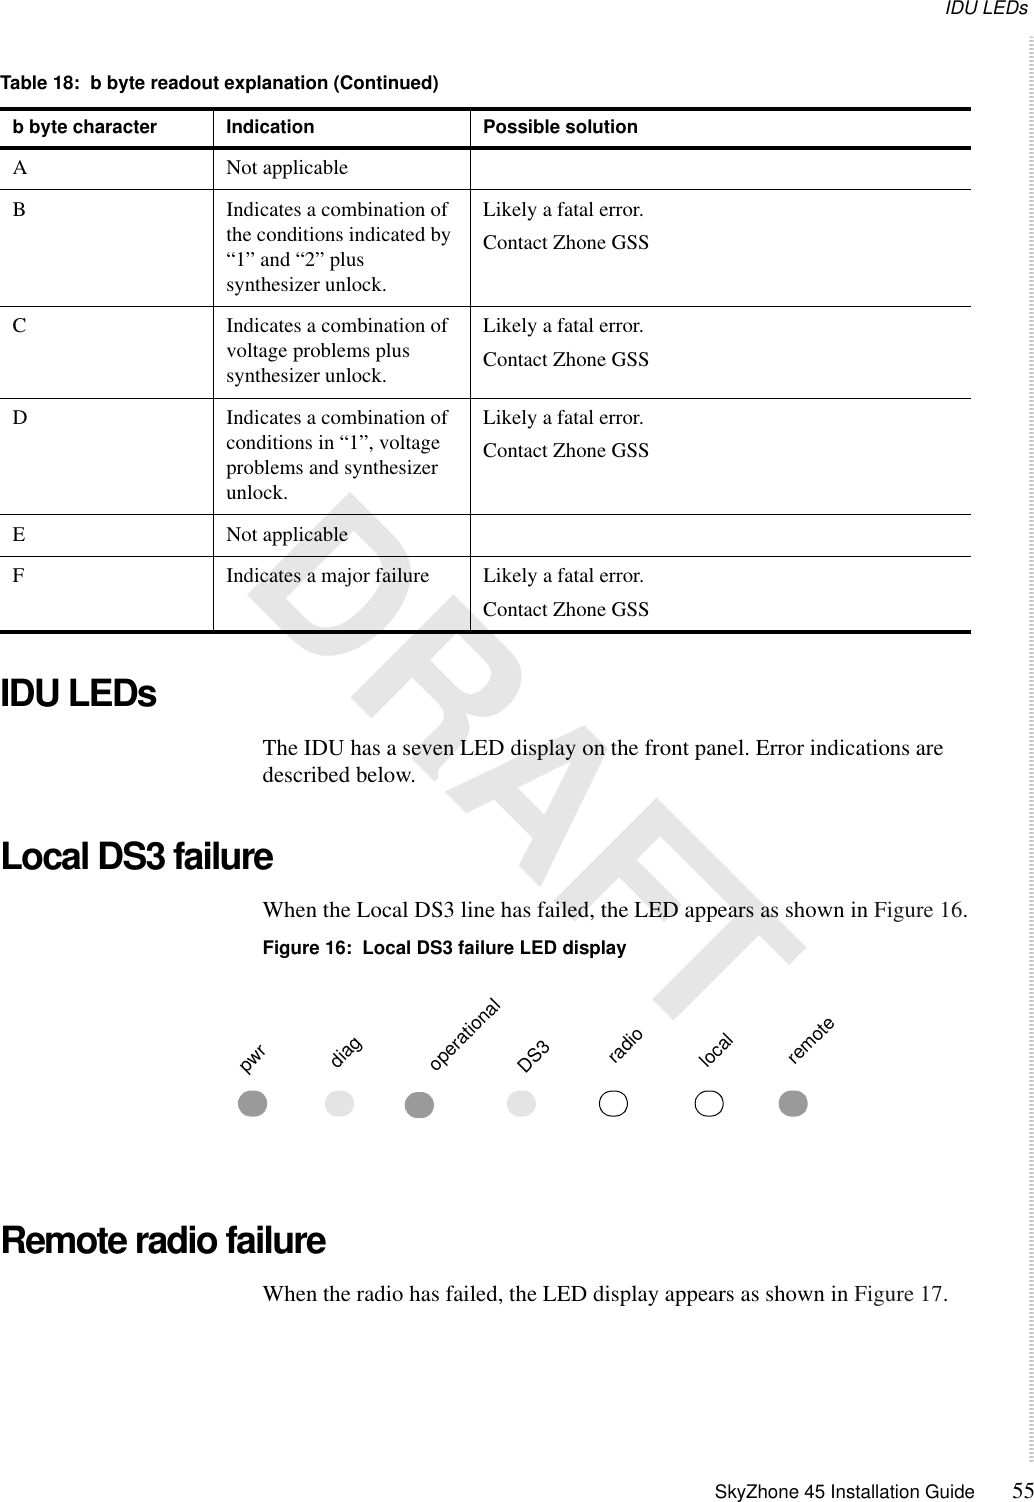 IDU LEDs SkyZhone 45 Installation Guide 55 DRAFTIDU LEDsThe IDU has a seven LED display on the front panel. Error indications are described below.Local DS3 failureWhen the Local DS3 line has failed, the LED appears as shown in Figure 16.Figure 16:  Local DS3 failure LED displayRemote radio failureWhen the radio has failed, the LED display appears as shown in Figure 17.A Not applicableB Indicates a combination of the conditions indicated by “1” and “2” plus synthesizer unlock.Likely a fatal error.Contact Zhone GSSC Indicates a combination of voltage problems plus synthesizer unlock.Likely a fatal error.Contact Zhone GSSD Indicates a combination of conditions in “1”, voltage problems and synthesizer unlock.Likely a fatal error.Contact Zhone GSSE Not applicableF Indicates a major failure Likely a fatal error.Contact Zhone GSSTable 18:  b byte readout explanation (Continued)b byte character Indication Possible solutionpwrdiagoperational DS3radiolocalremote